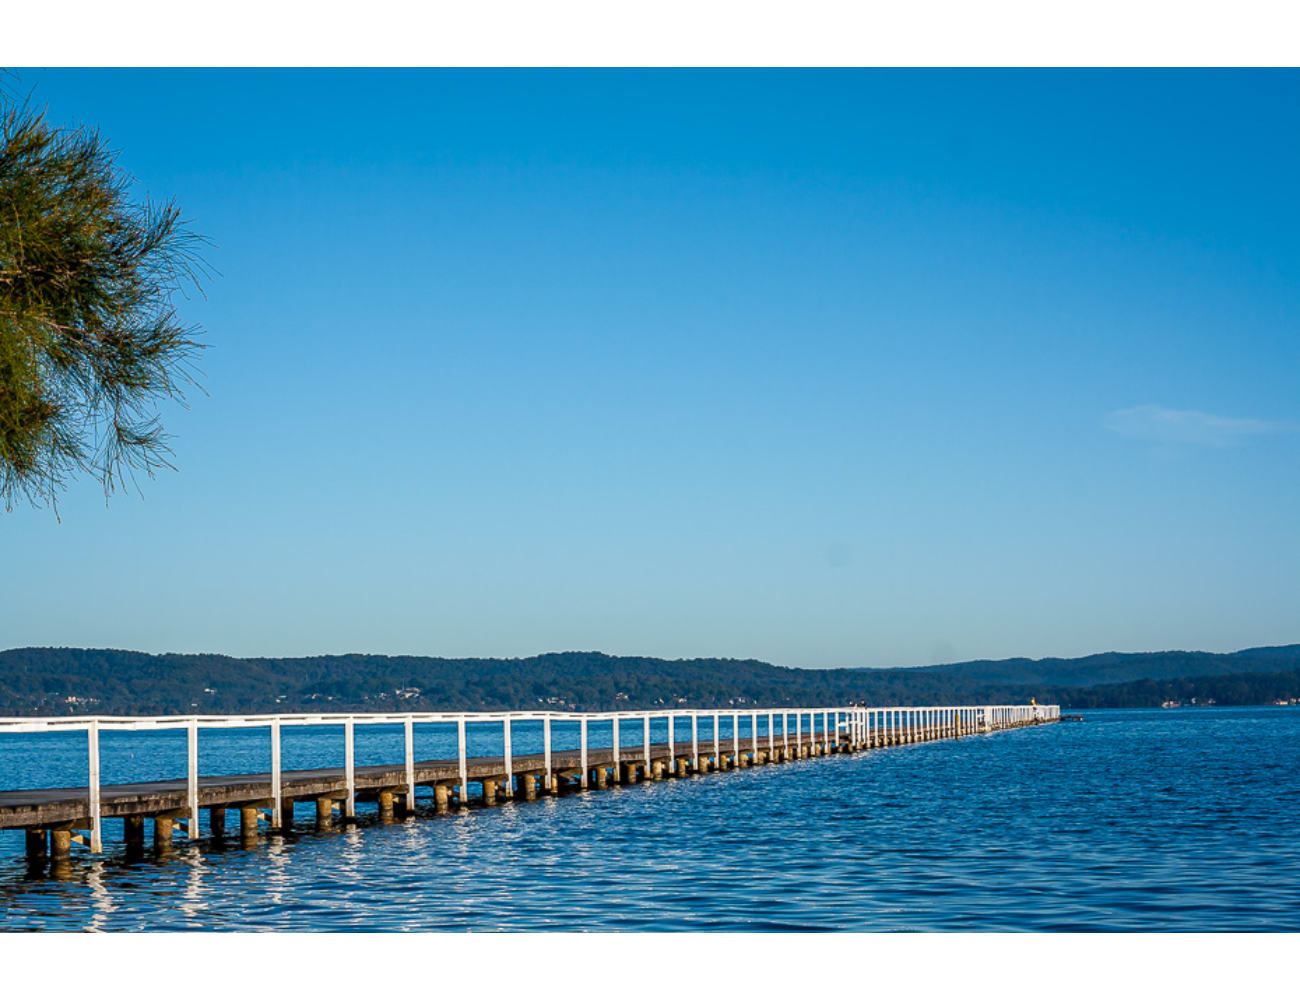 Tuggerah Lake - Ideal for water activities - 11.8 km